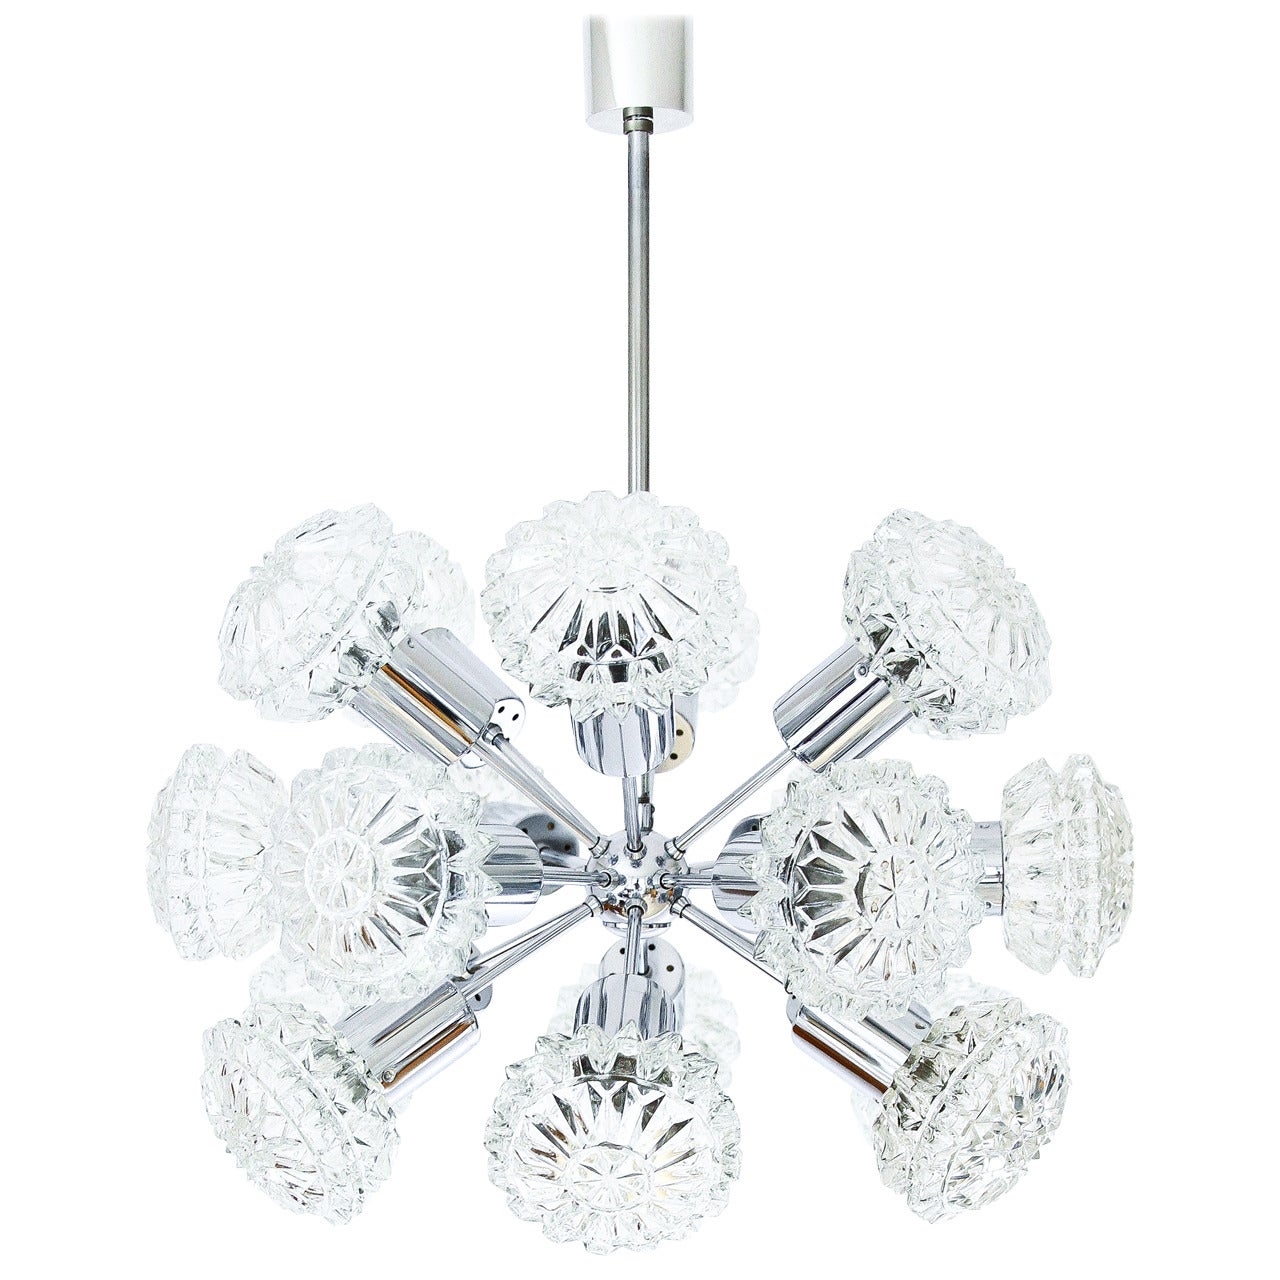 Mid-Century Modern Sputnik Chandelier, Textured Clear Glass and Chrome, 1970s For Sale